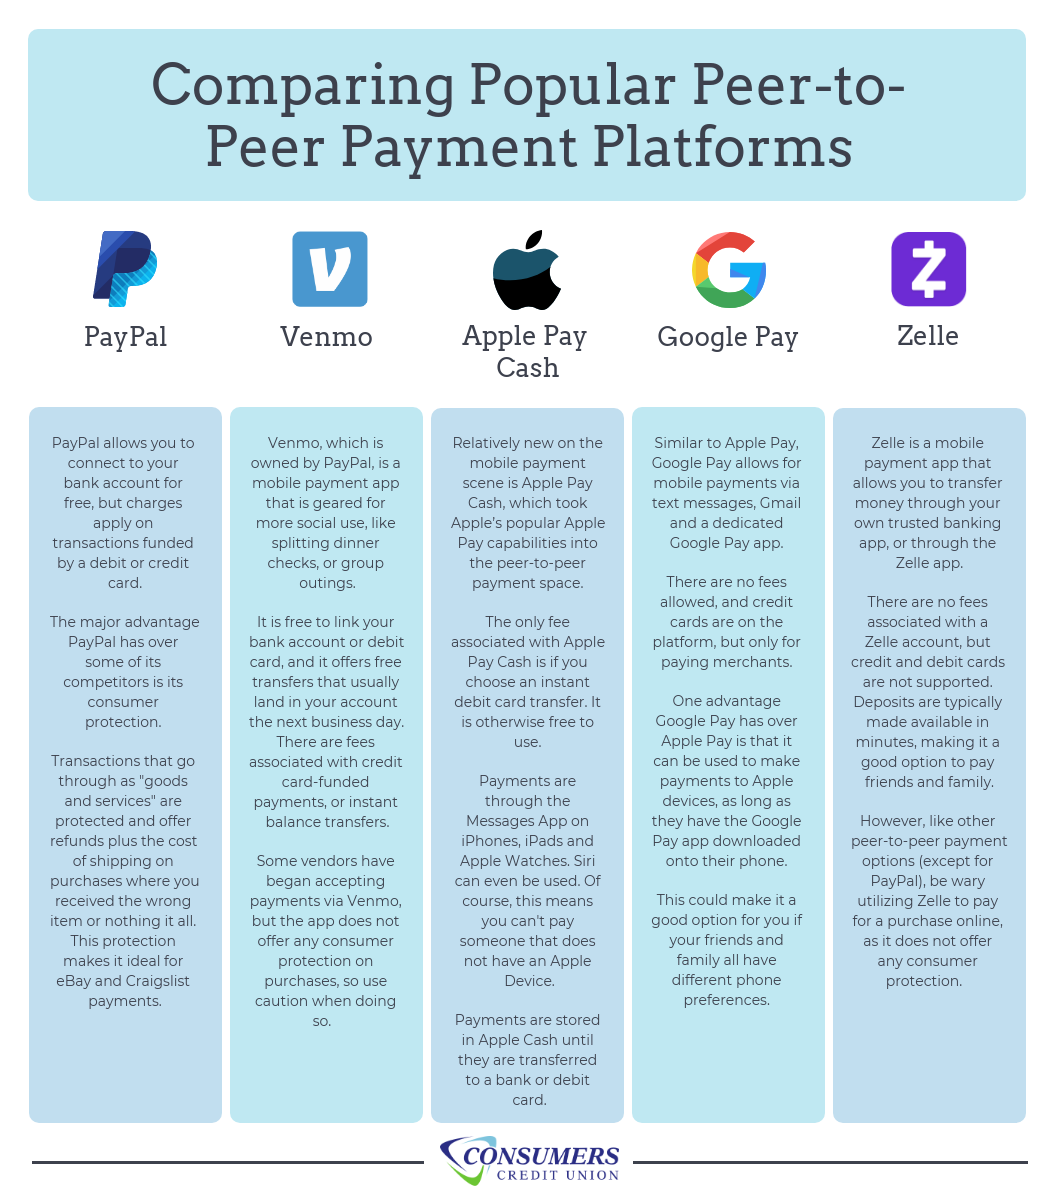 peer-to-peer payment options - consumers credit union